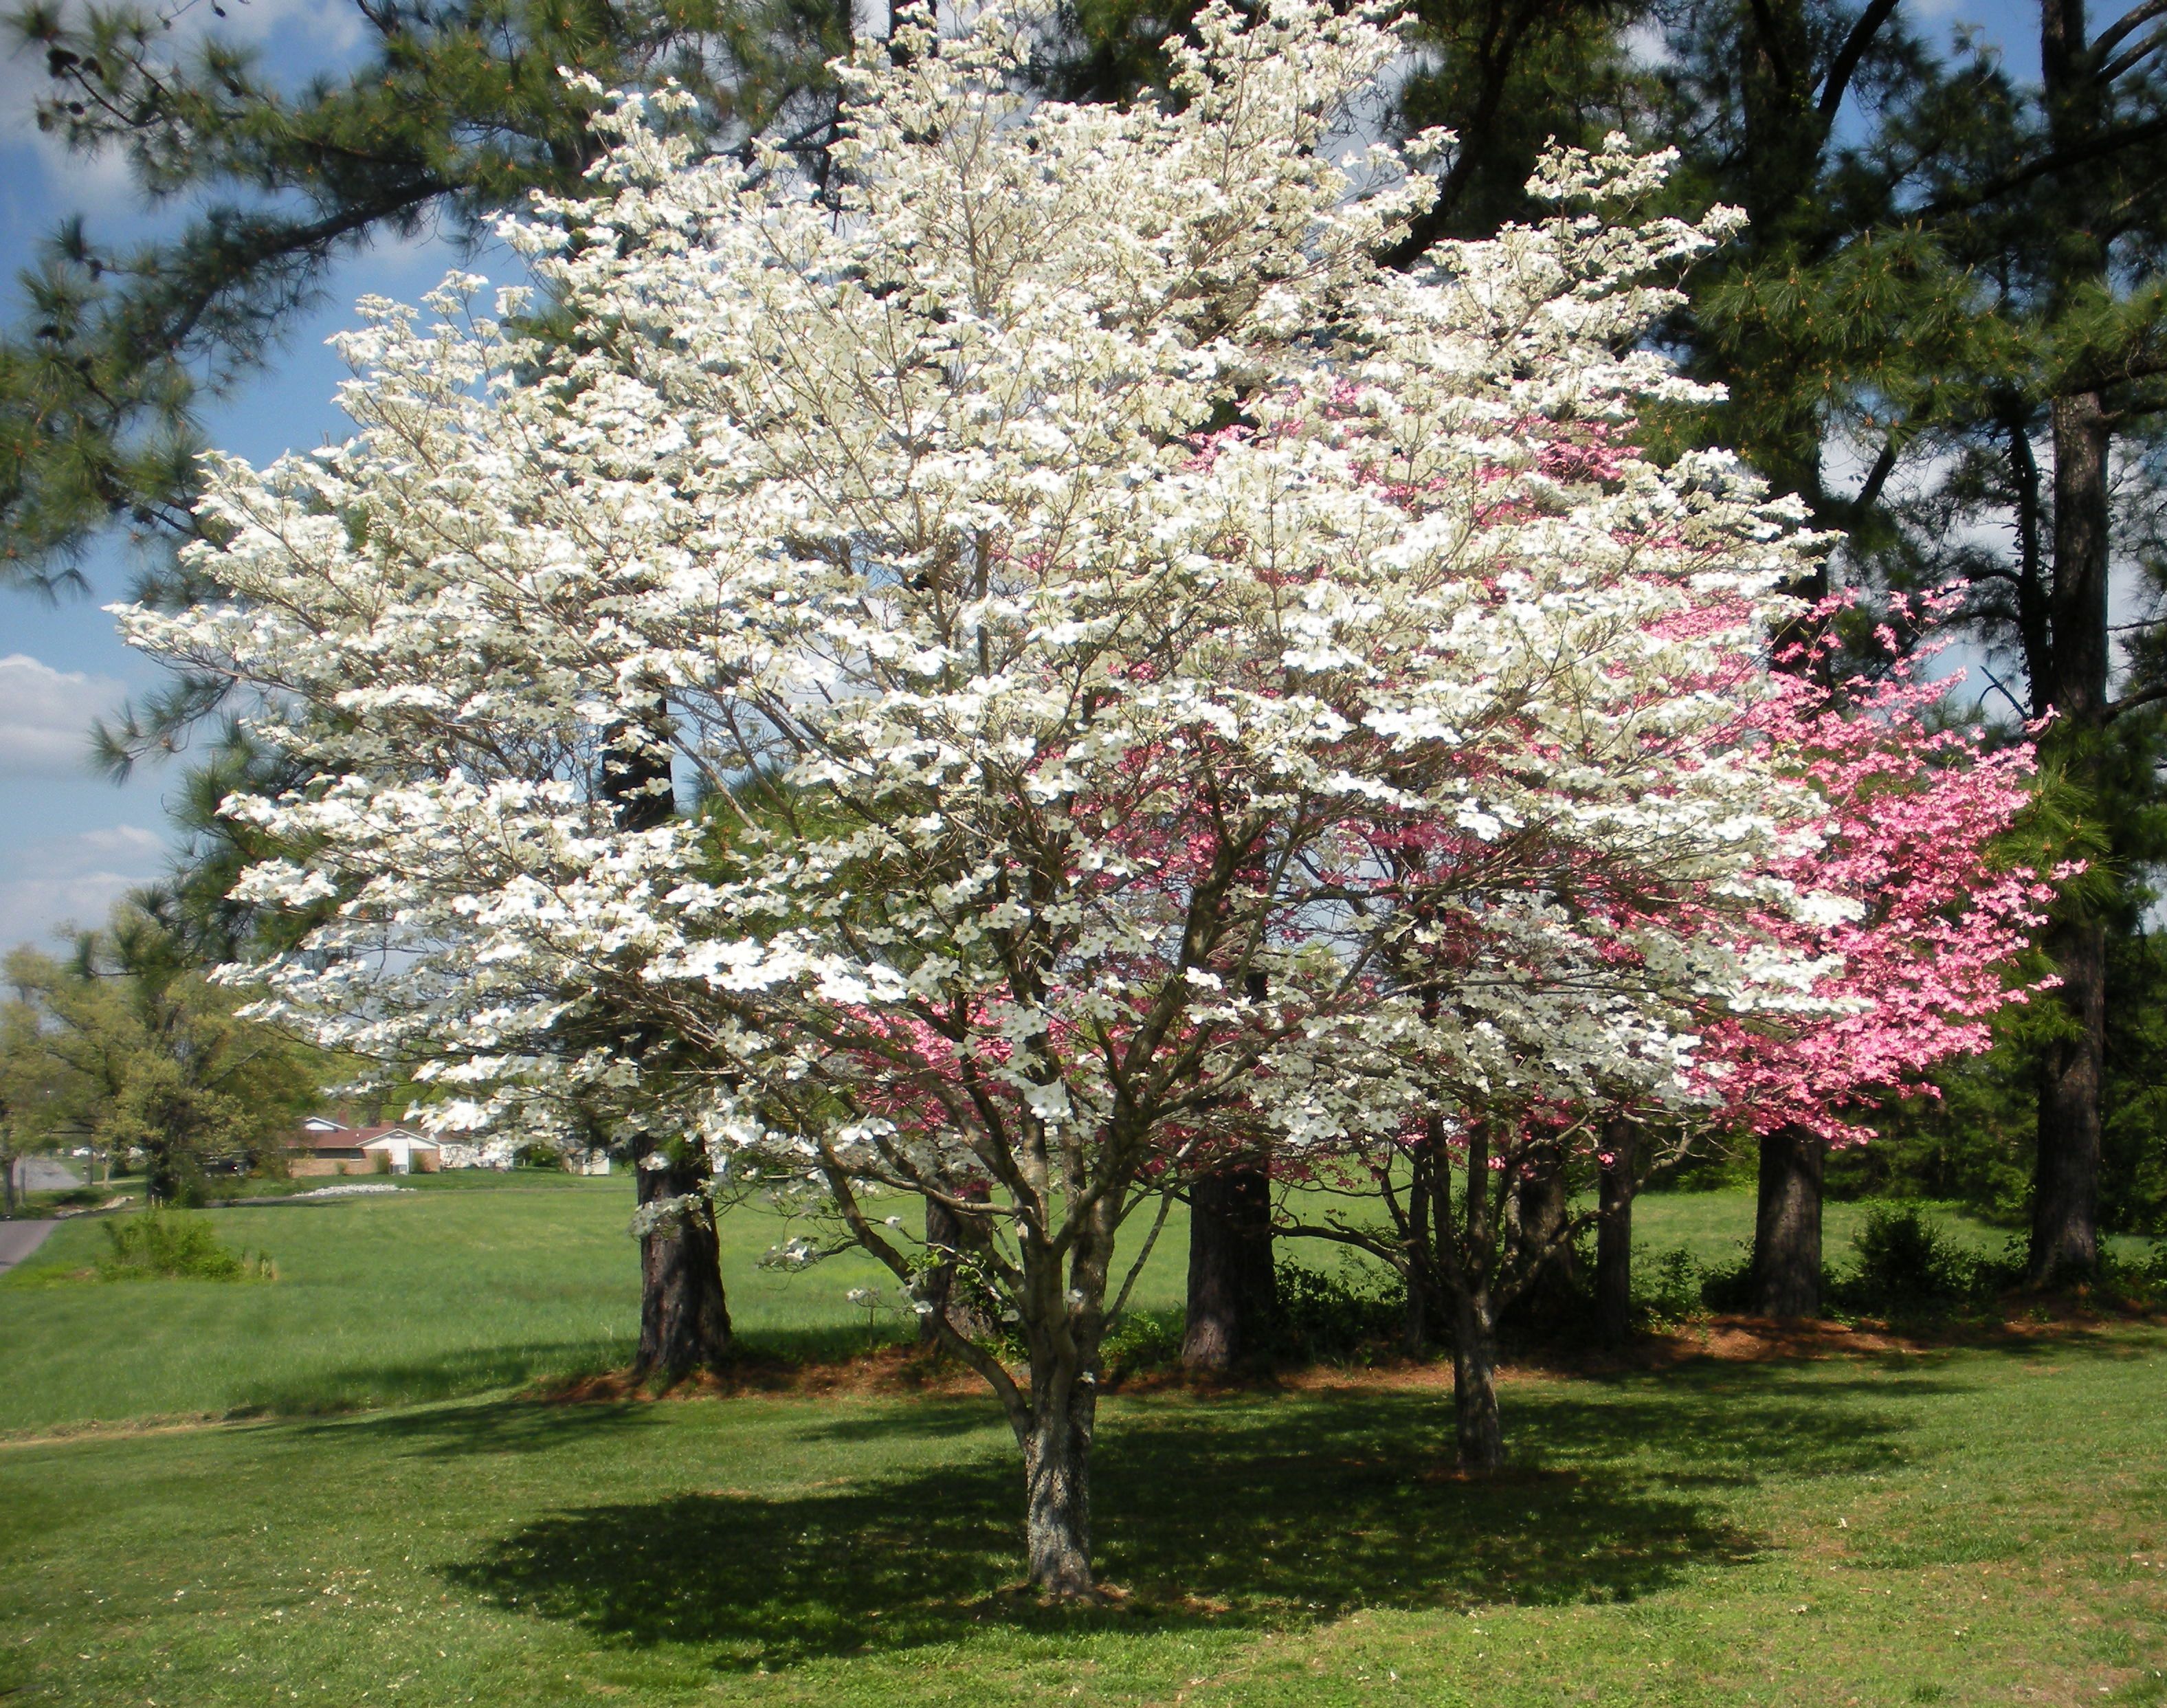 Dogwood Trees in bloom | Trees are our Friends | Pinterest | Dogwood ...